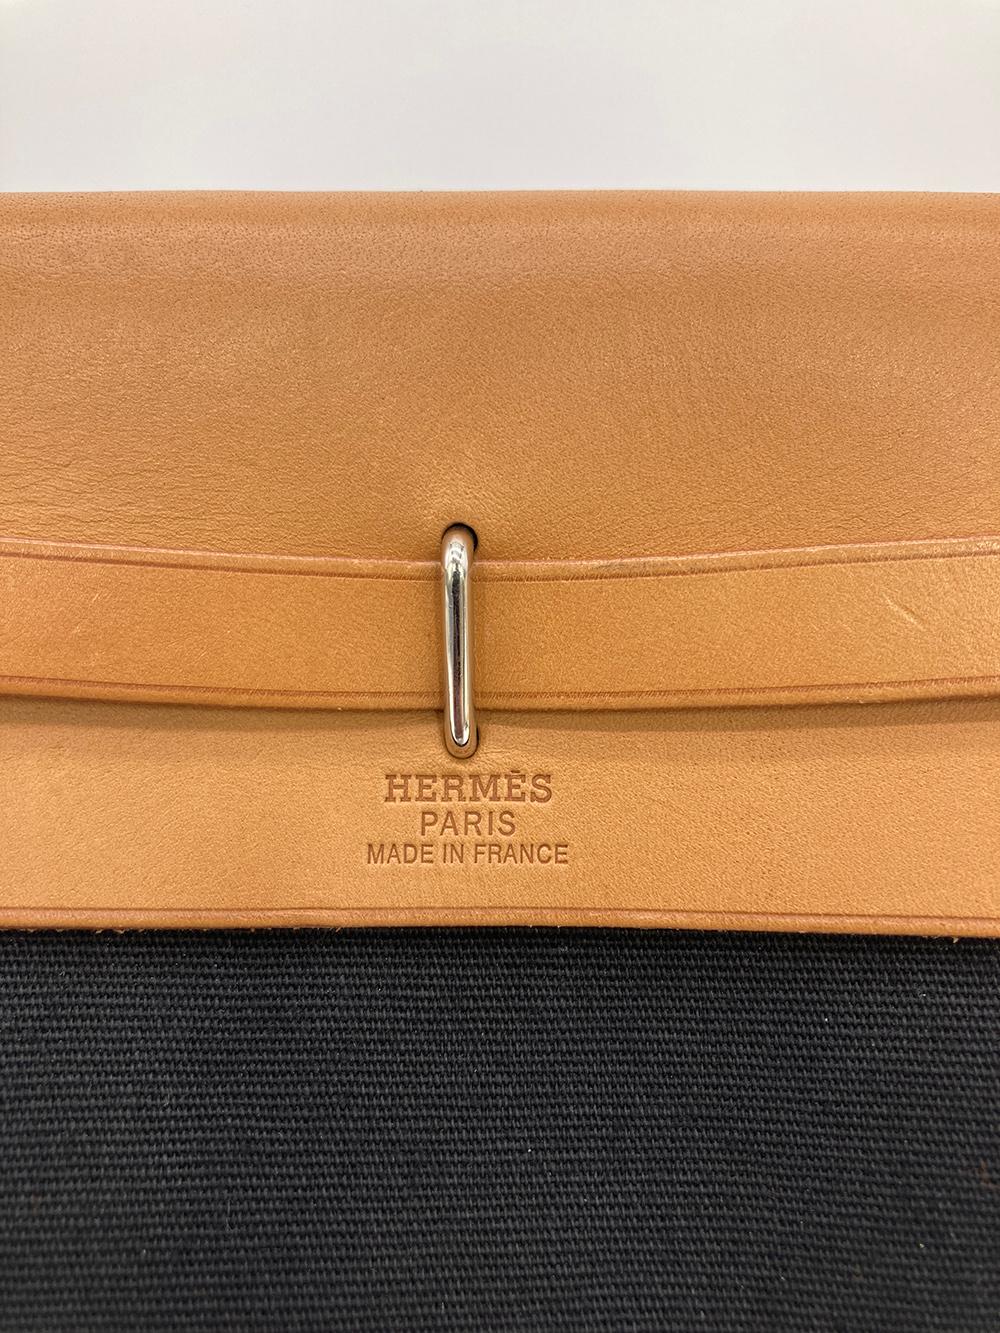 Hermes Herbag Tpm Mini Black and Beige Sangles Canvas In Good Condition For Sale In Philadelphia, PA